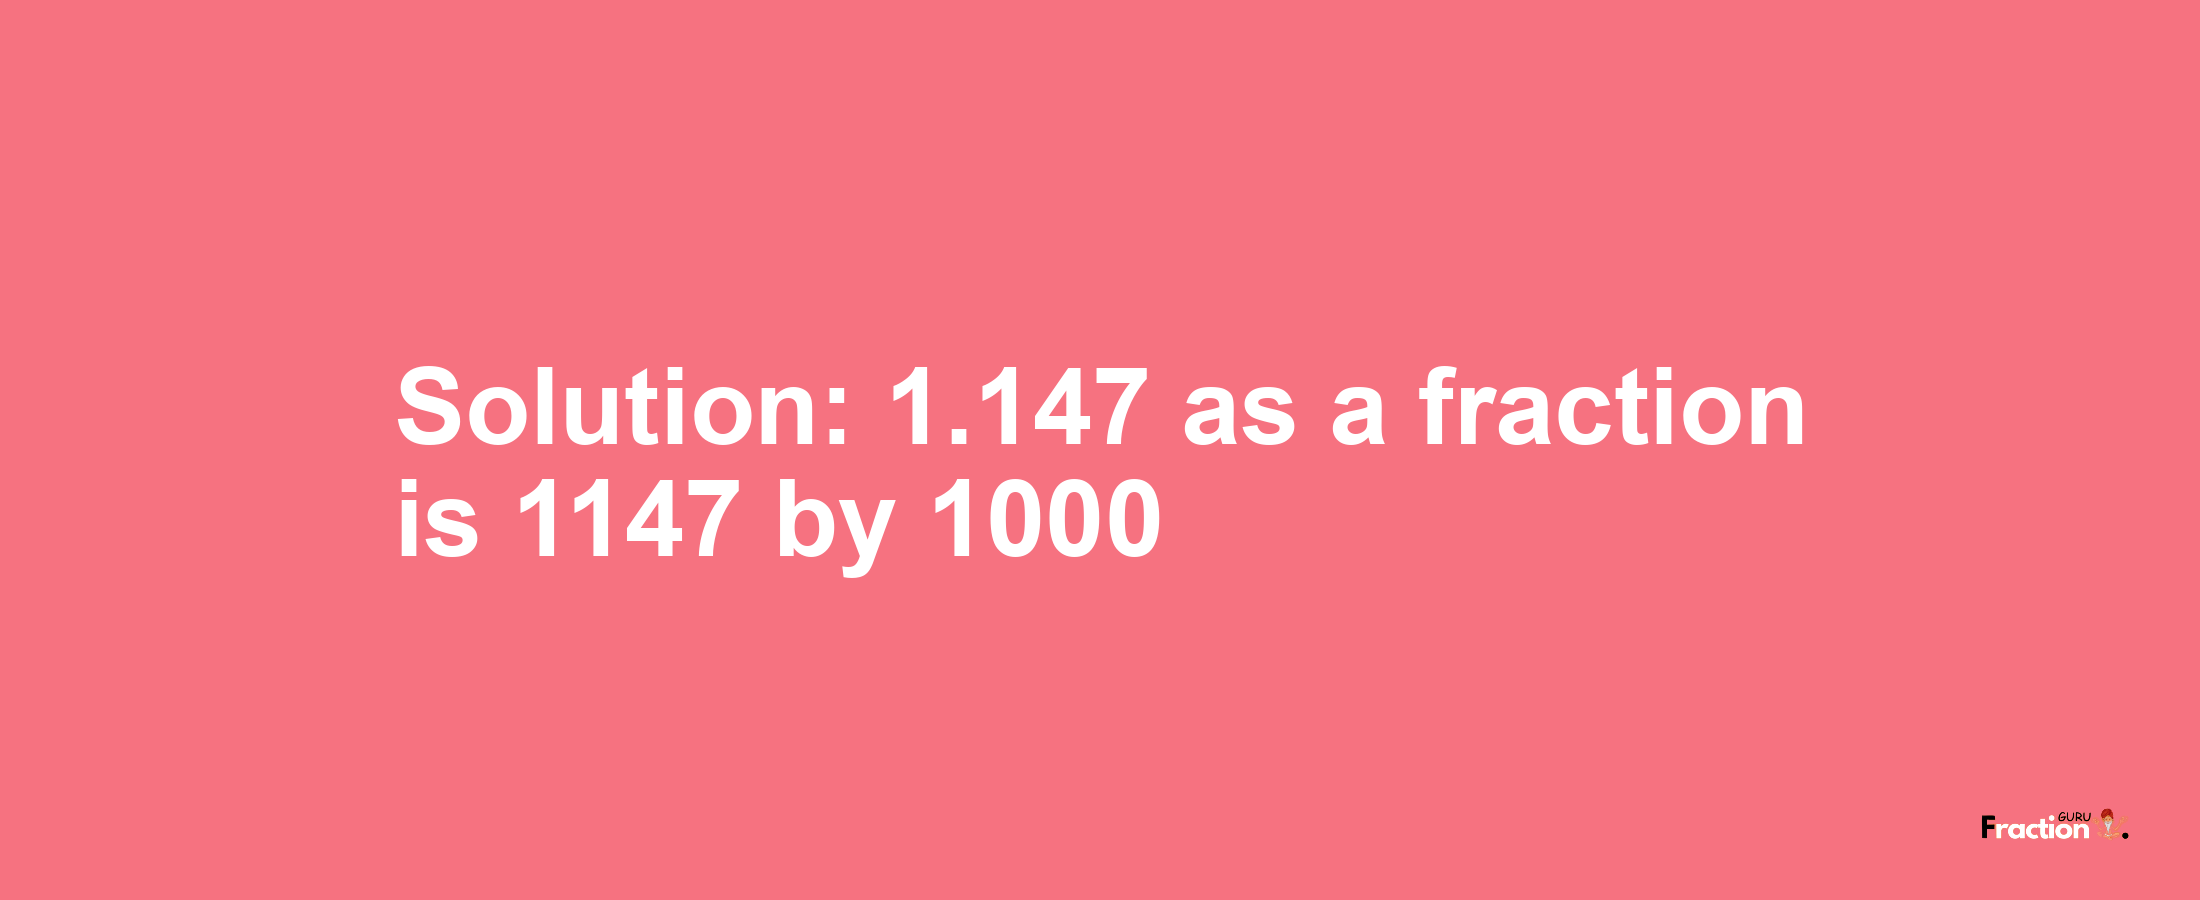 Solution:1.147 as a fraction is 1147/1000